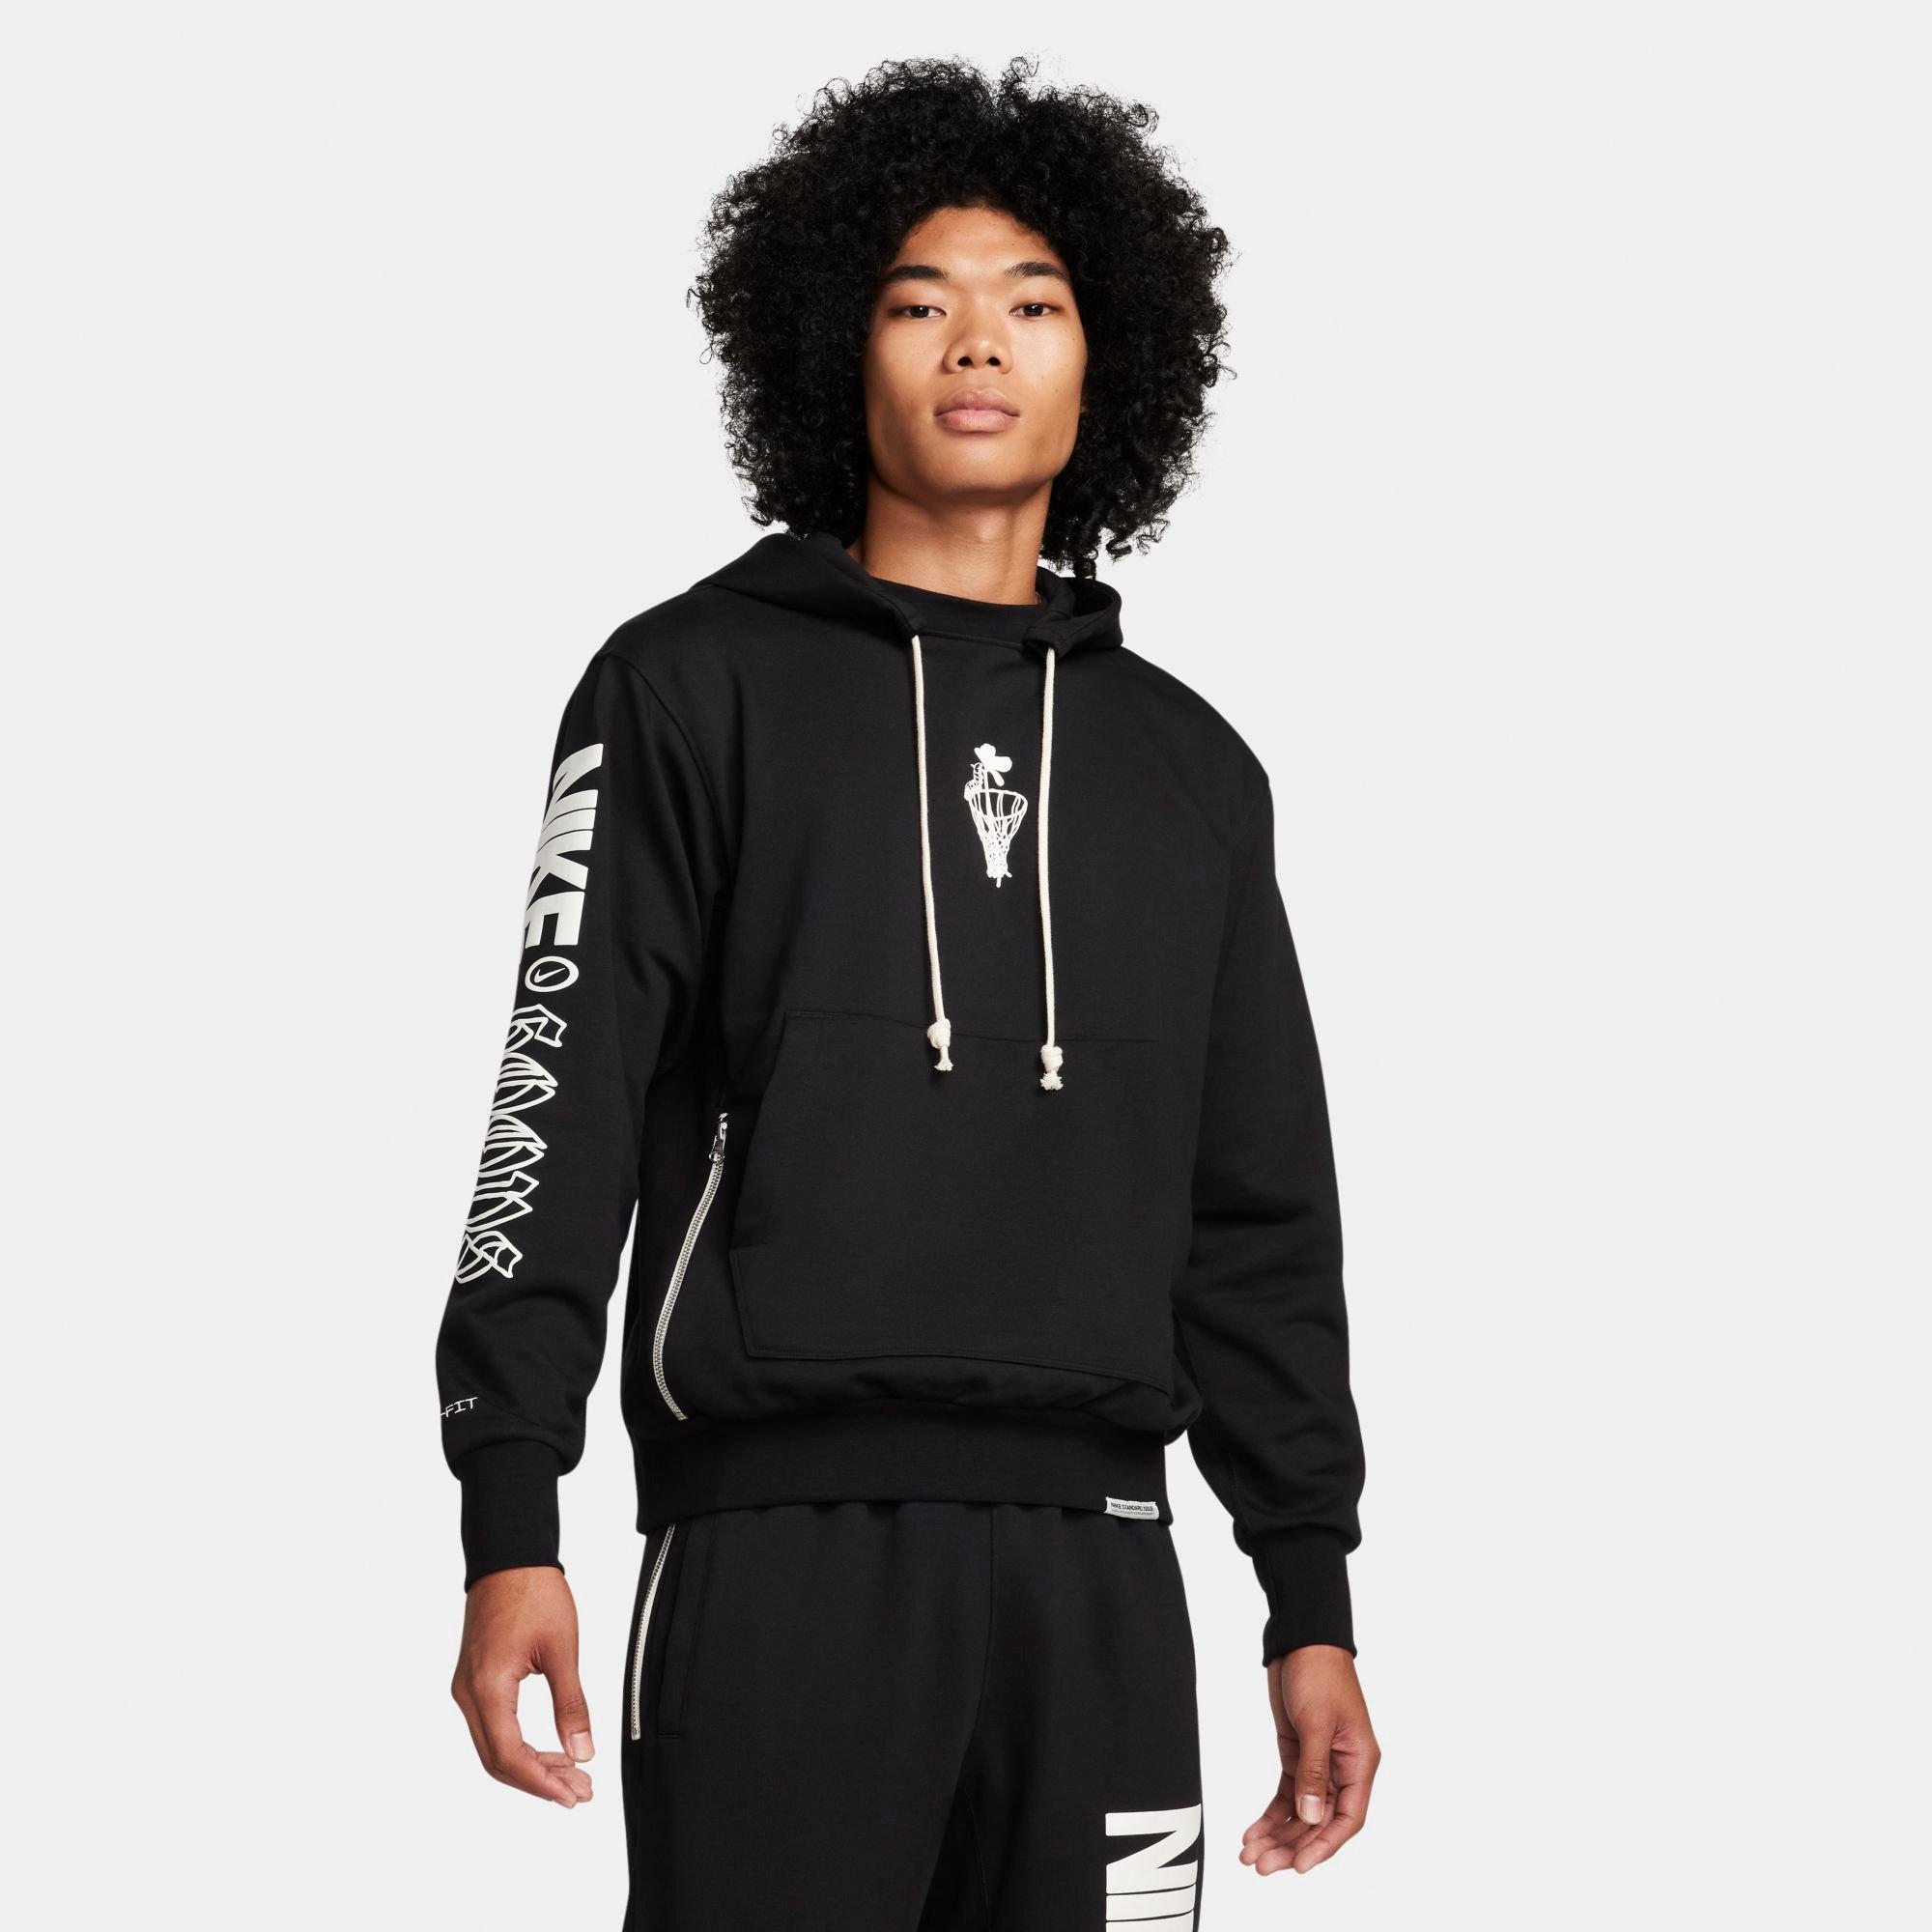 Men's Nike Standard Issue Dri-FIT Basketball Graphic Pullover Hoodie